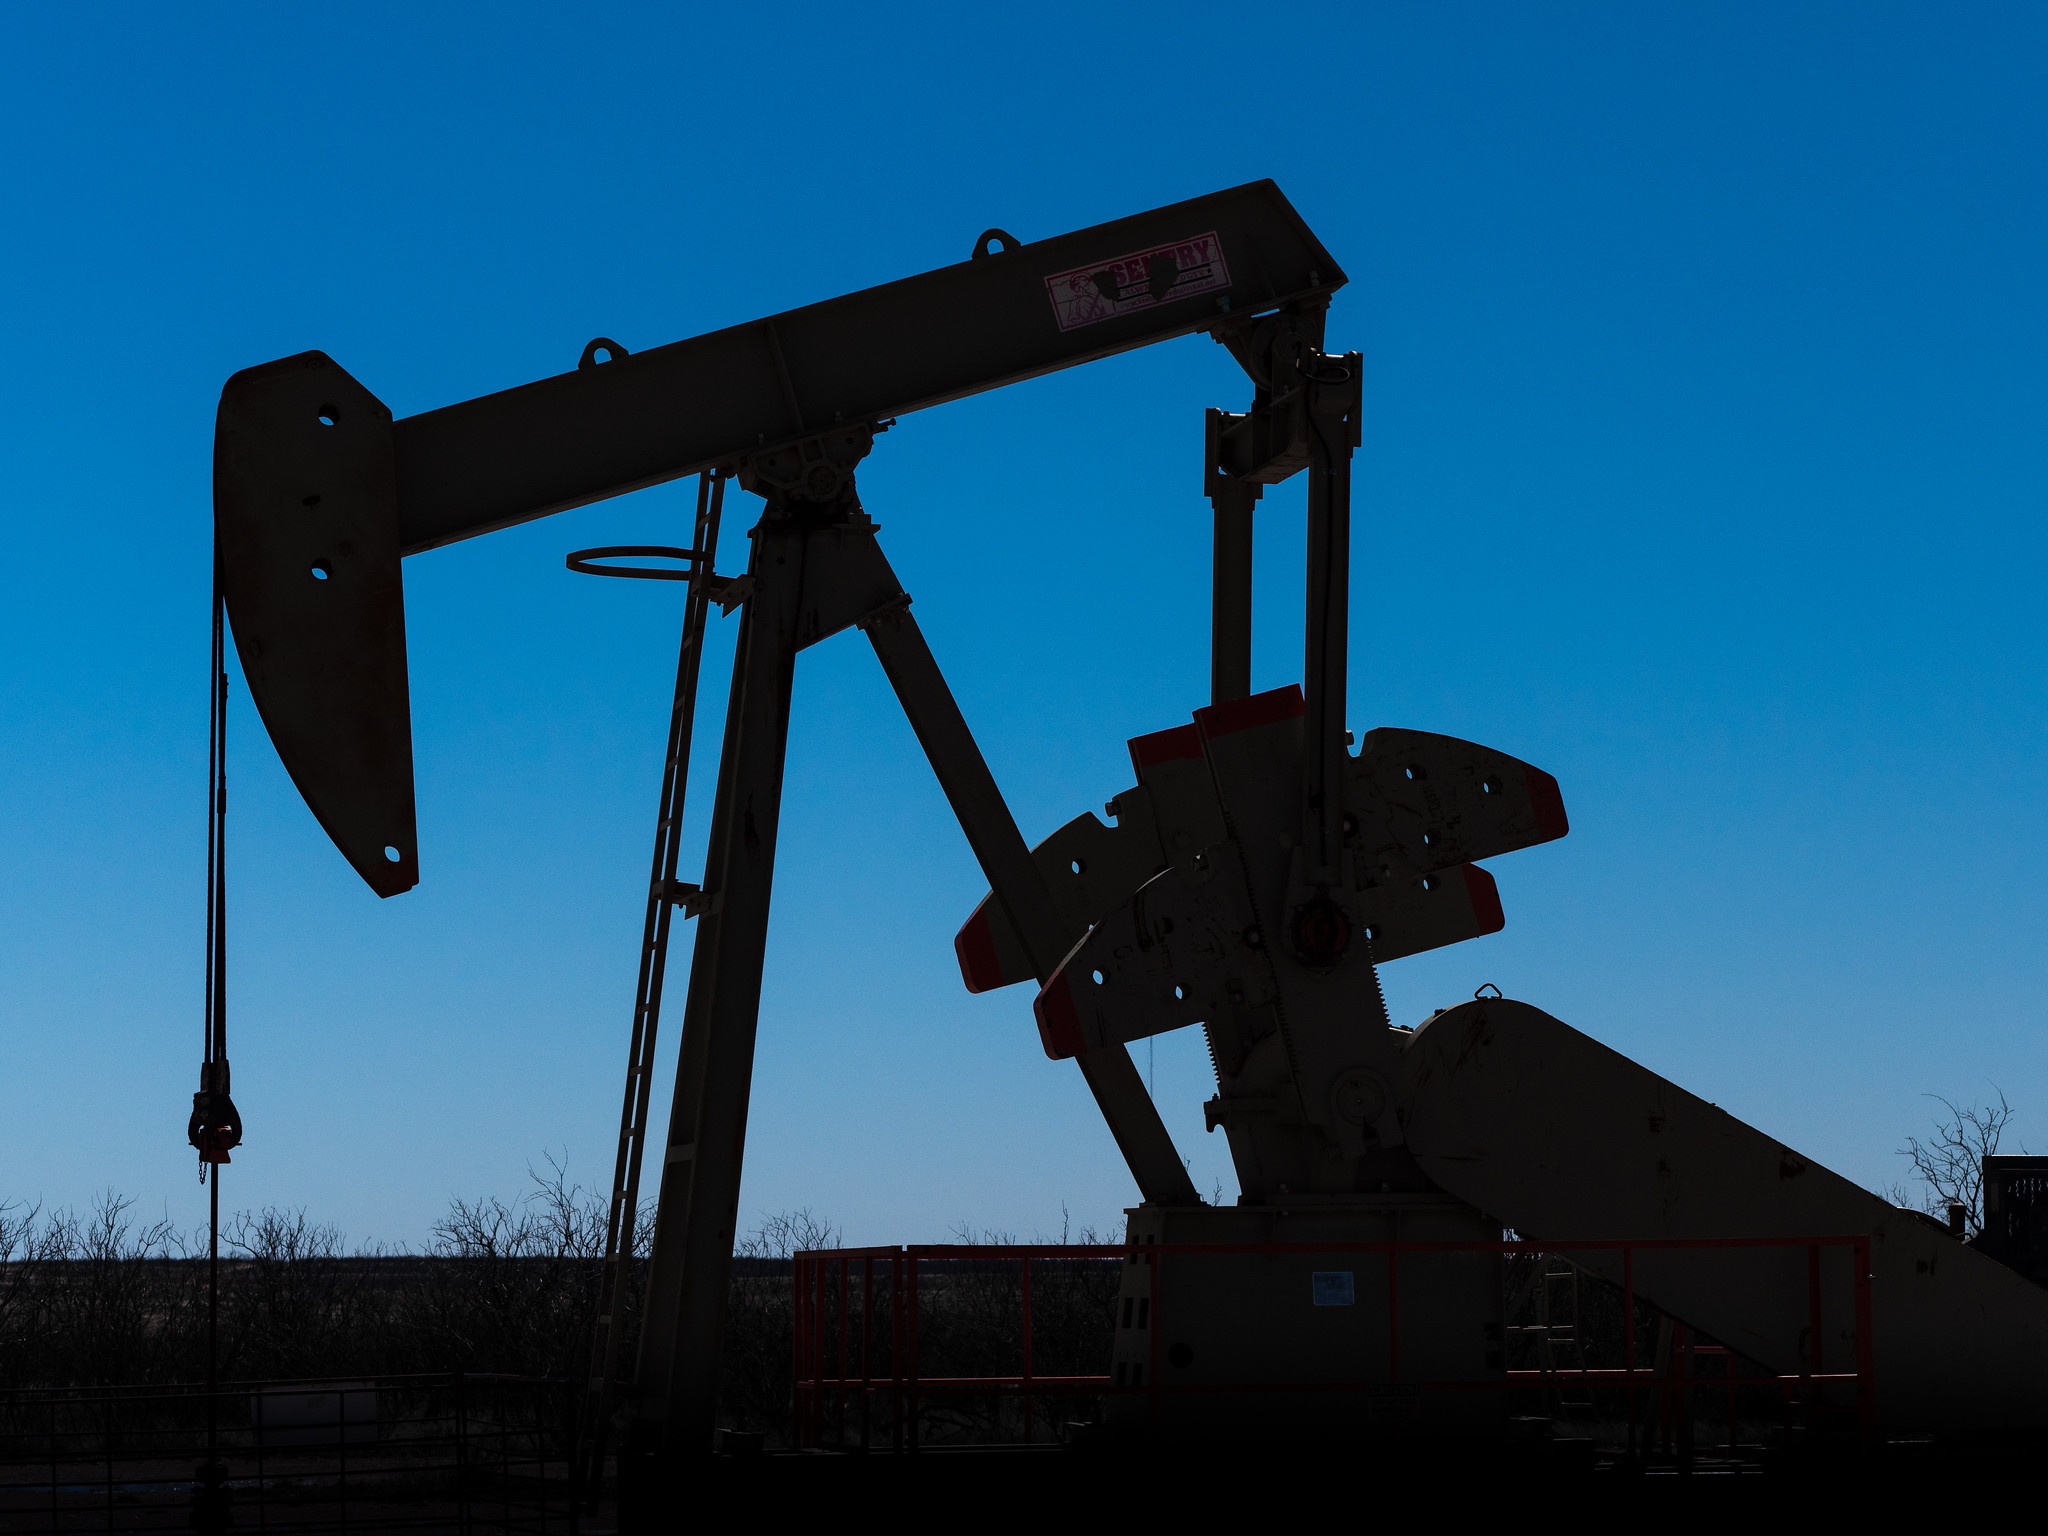 Silhouette of a pumpjack - a large metal lever-like machine - against a blue evening sky